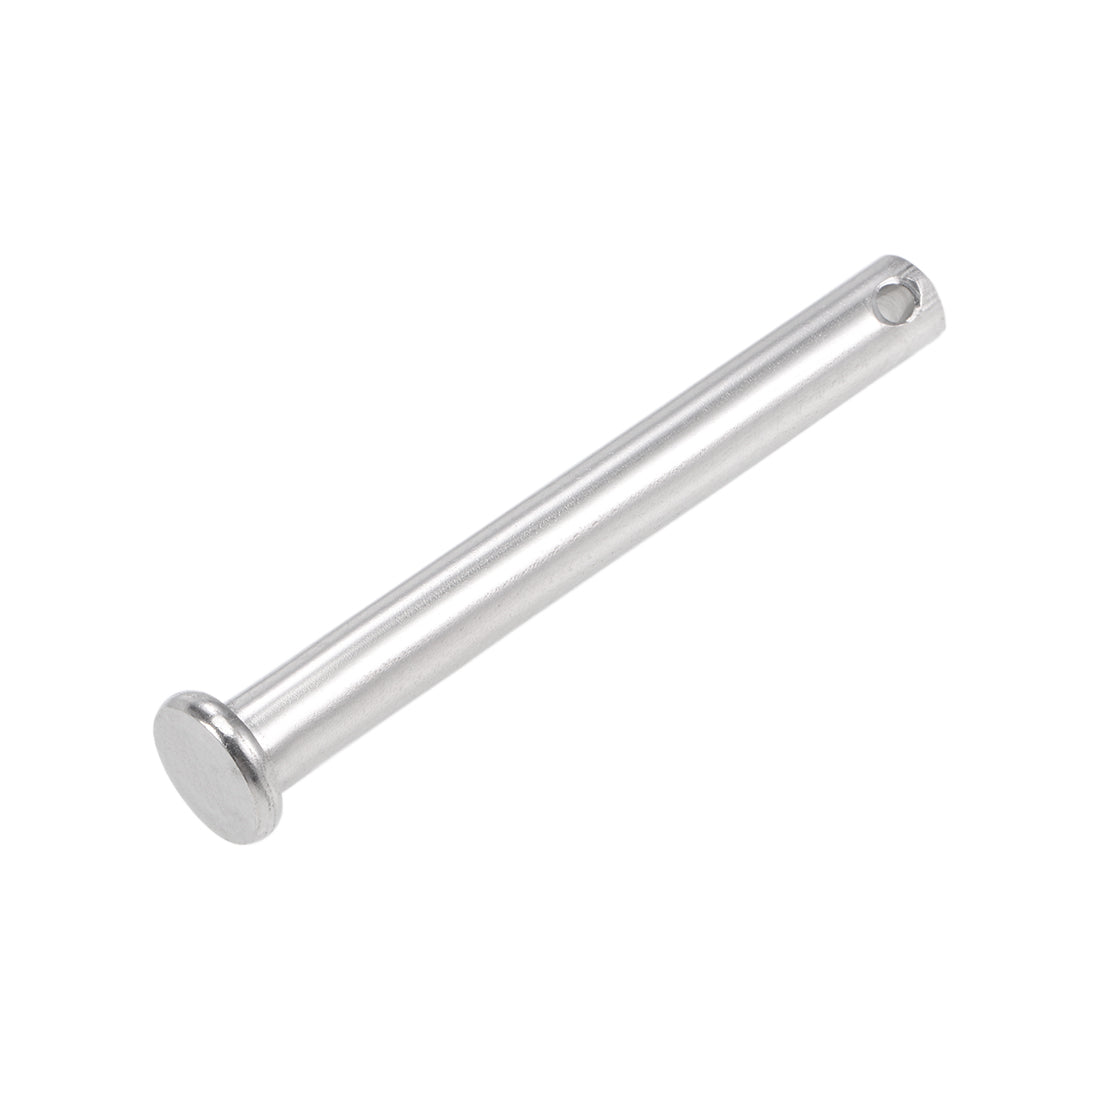 Uxcell Uxcell Single Hole Clevis Pins - 10mm x 60mm Flat Head 304 Stainless Steel Link Hinge Pin